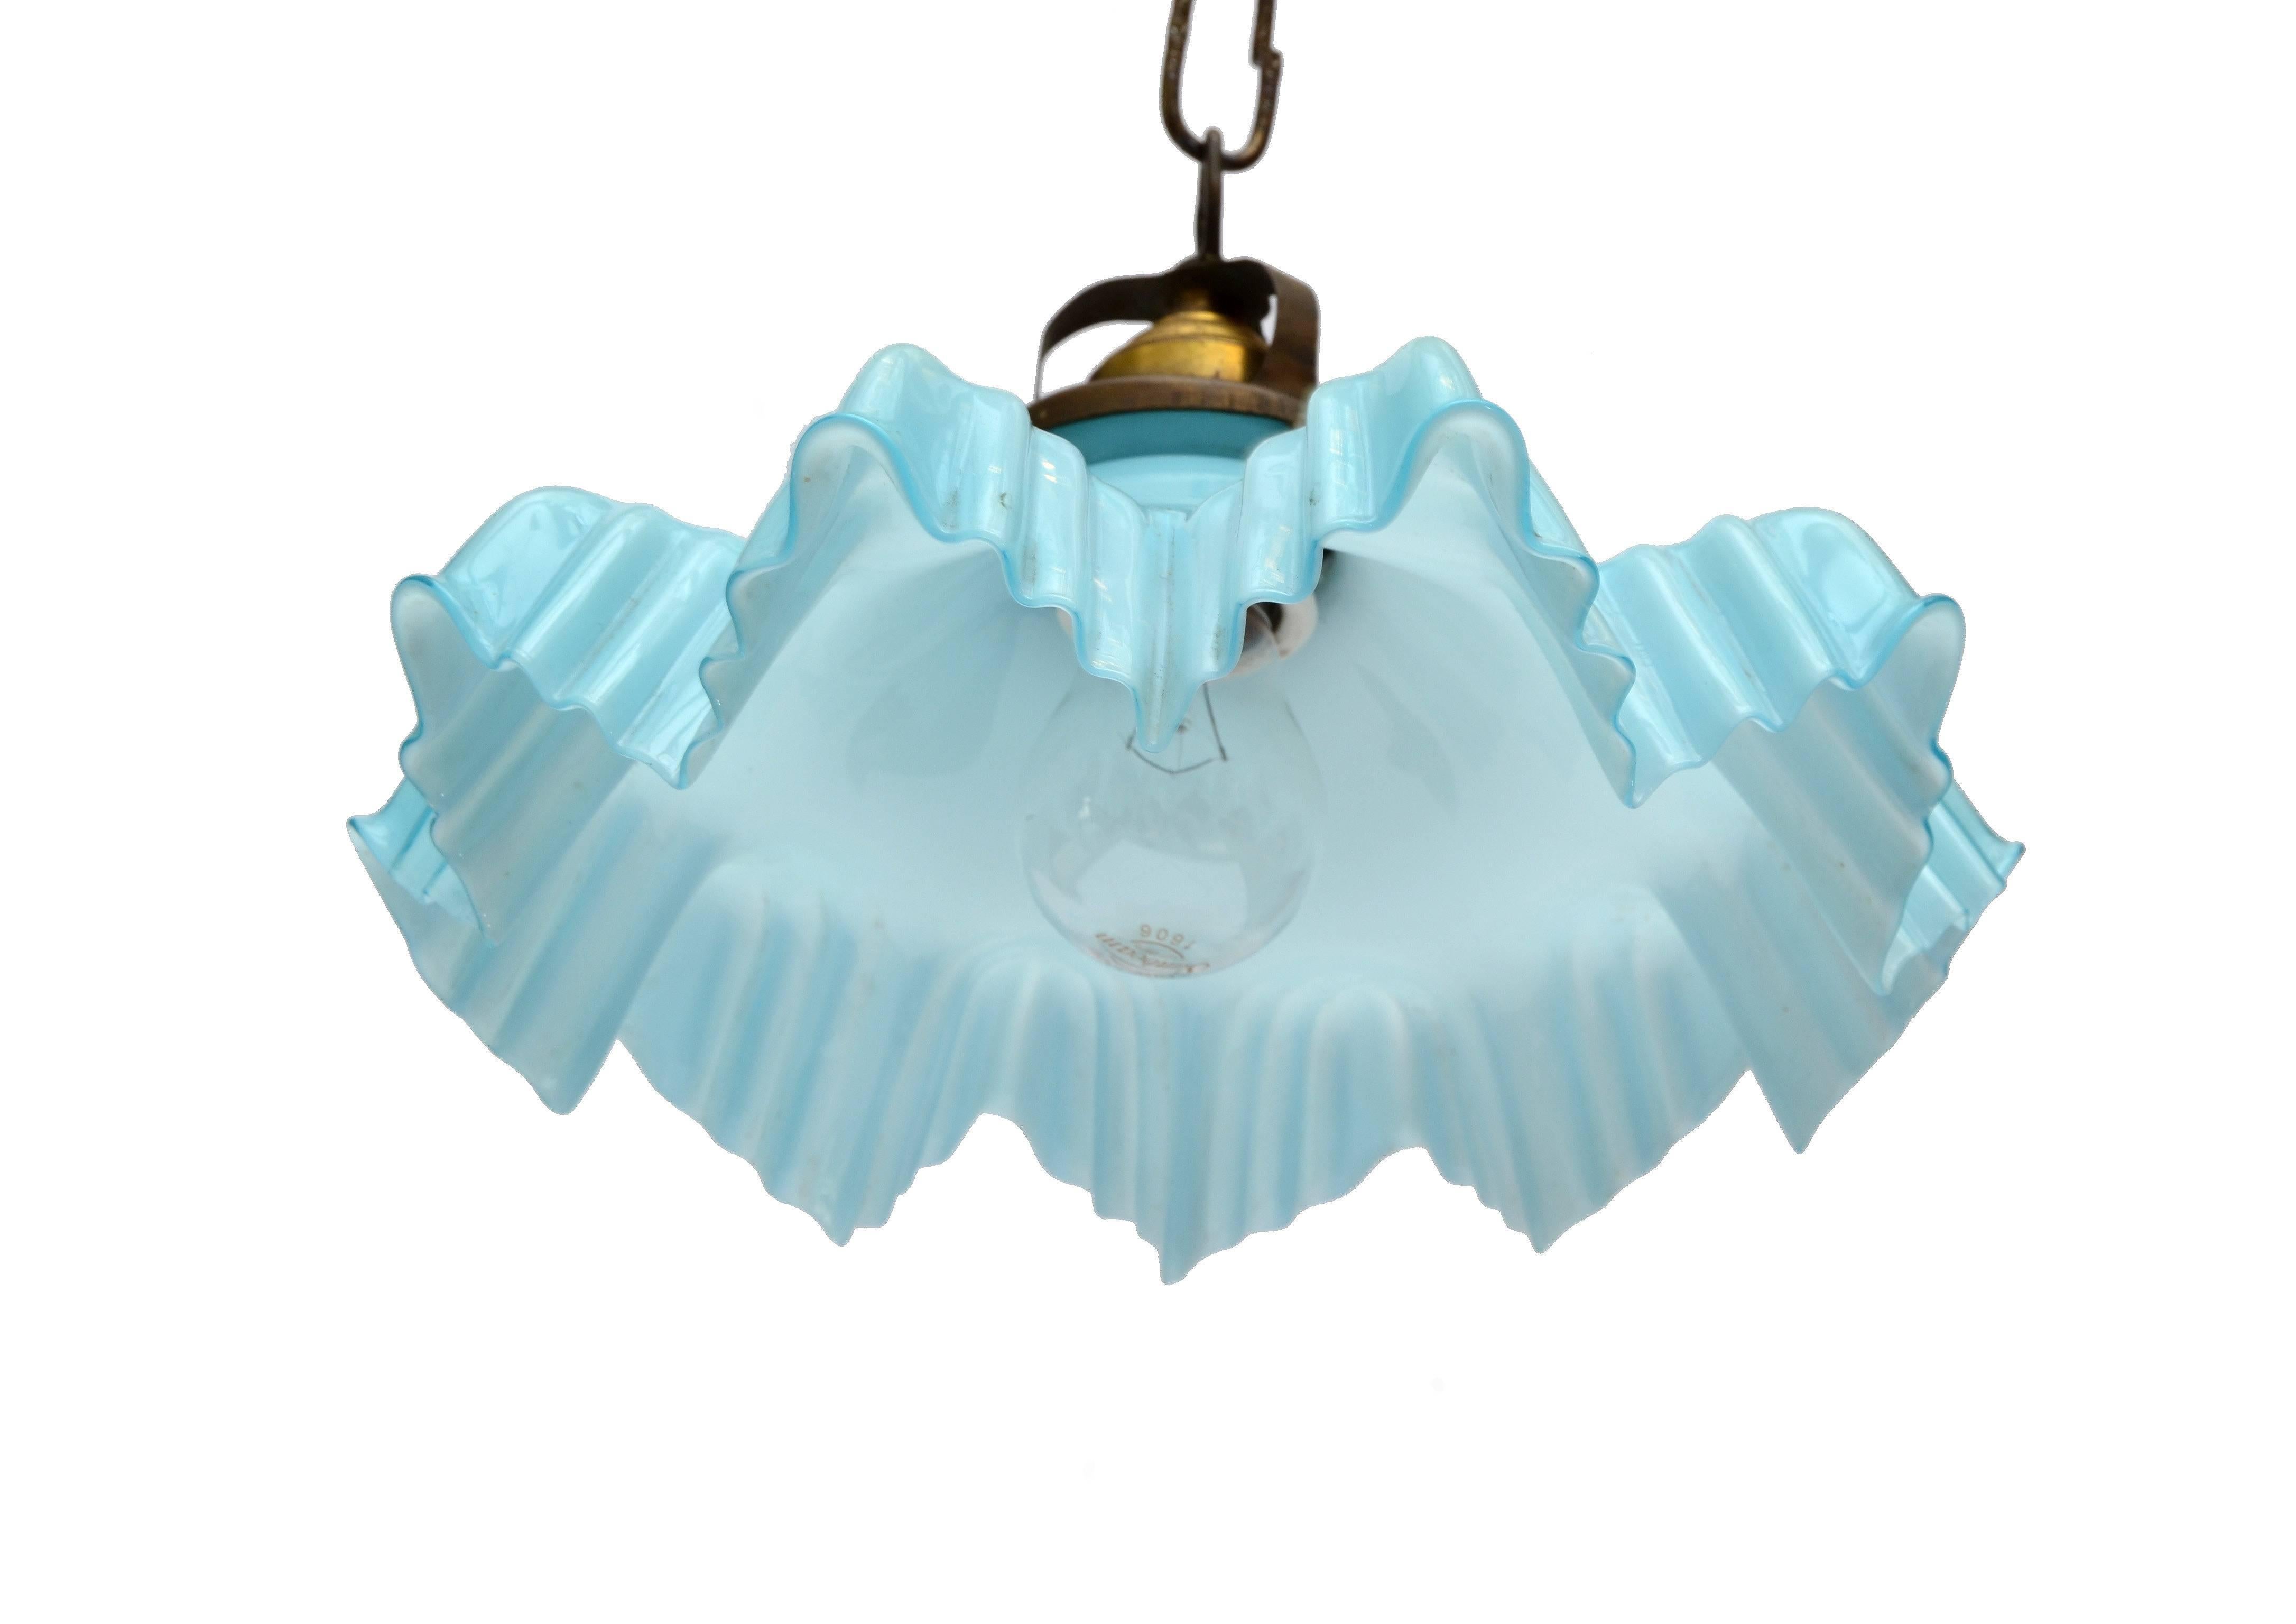 Petite vintage French blue opaline glass raffled ceiling light with bronze fitting.
In perfect working condition and uses one light bulb max. 60 watts.
 